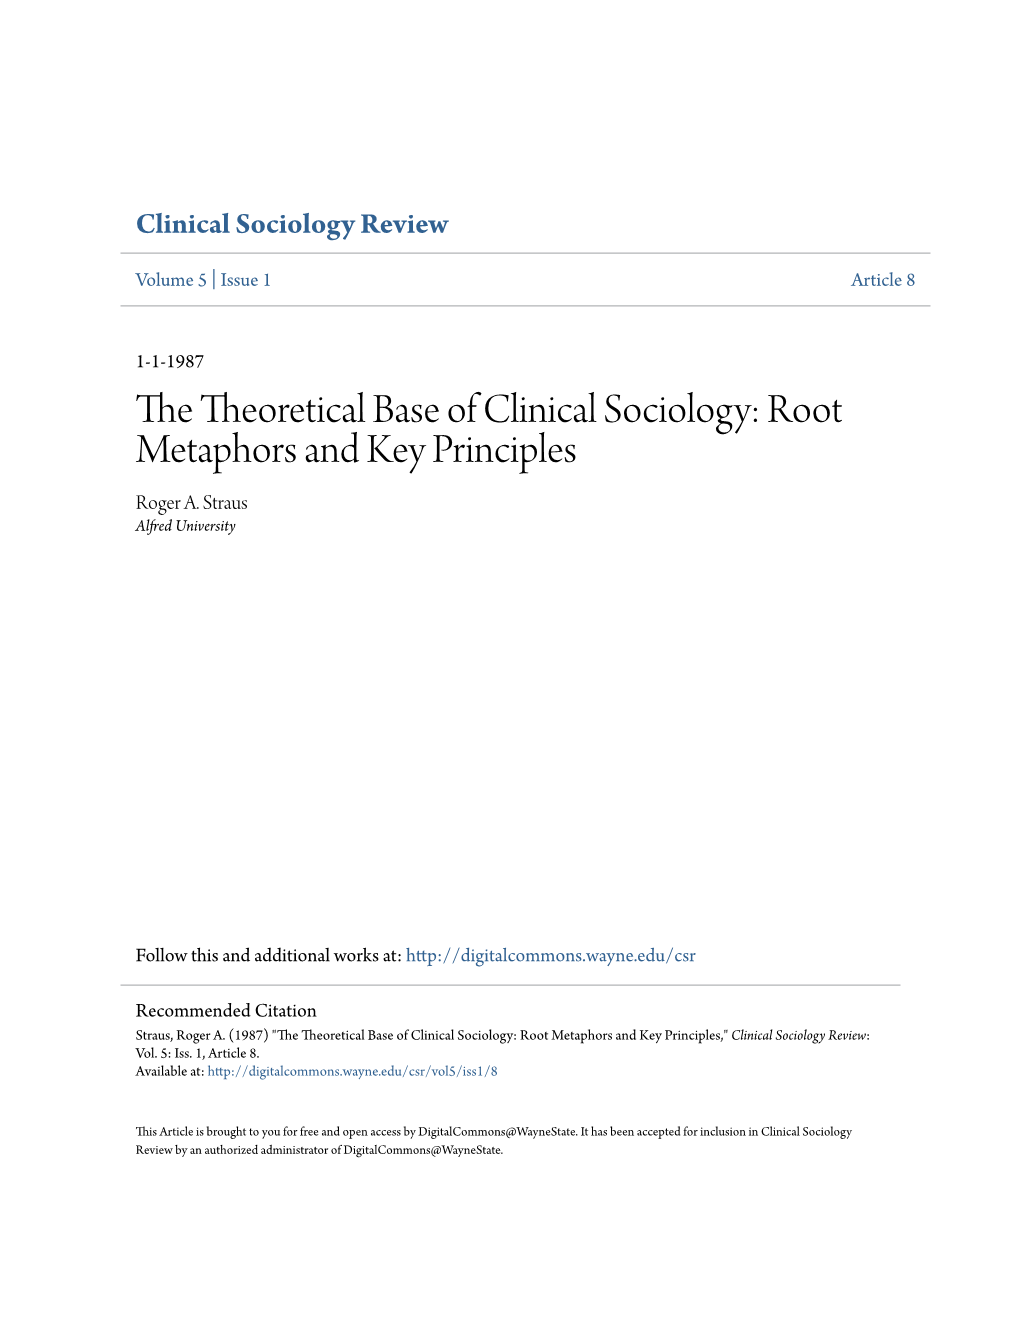 The Theoretical Base of Clinical Sociology: Root Metaphors and Key Principles Roger A